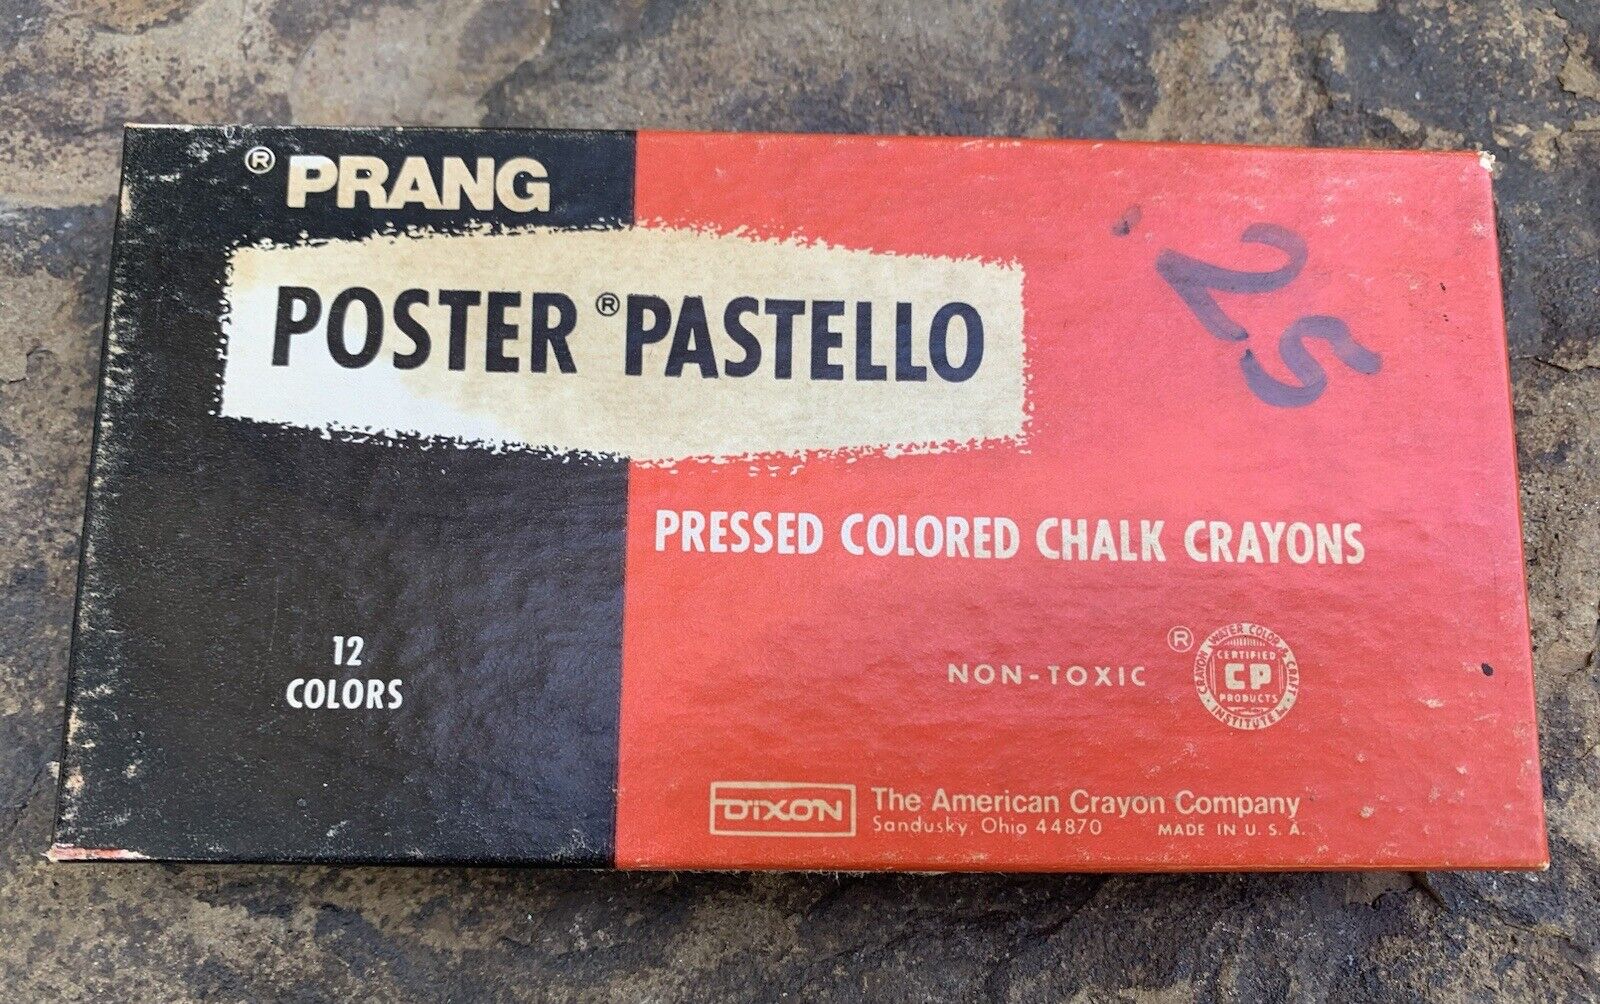 Prang Poster Pastello Colored Chalk Crayons. Not complete. Vintage